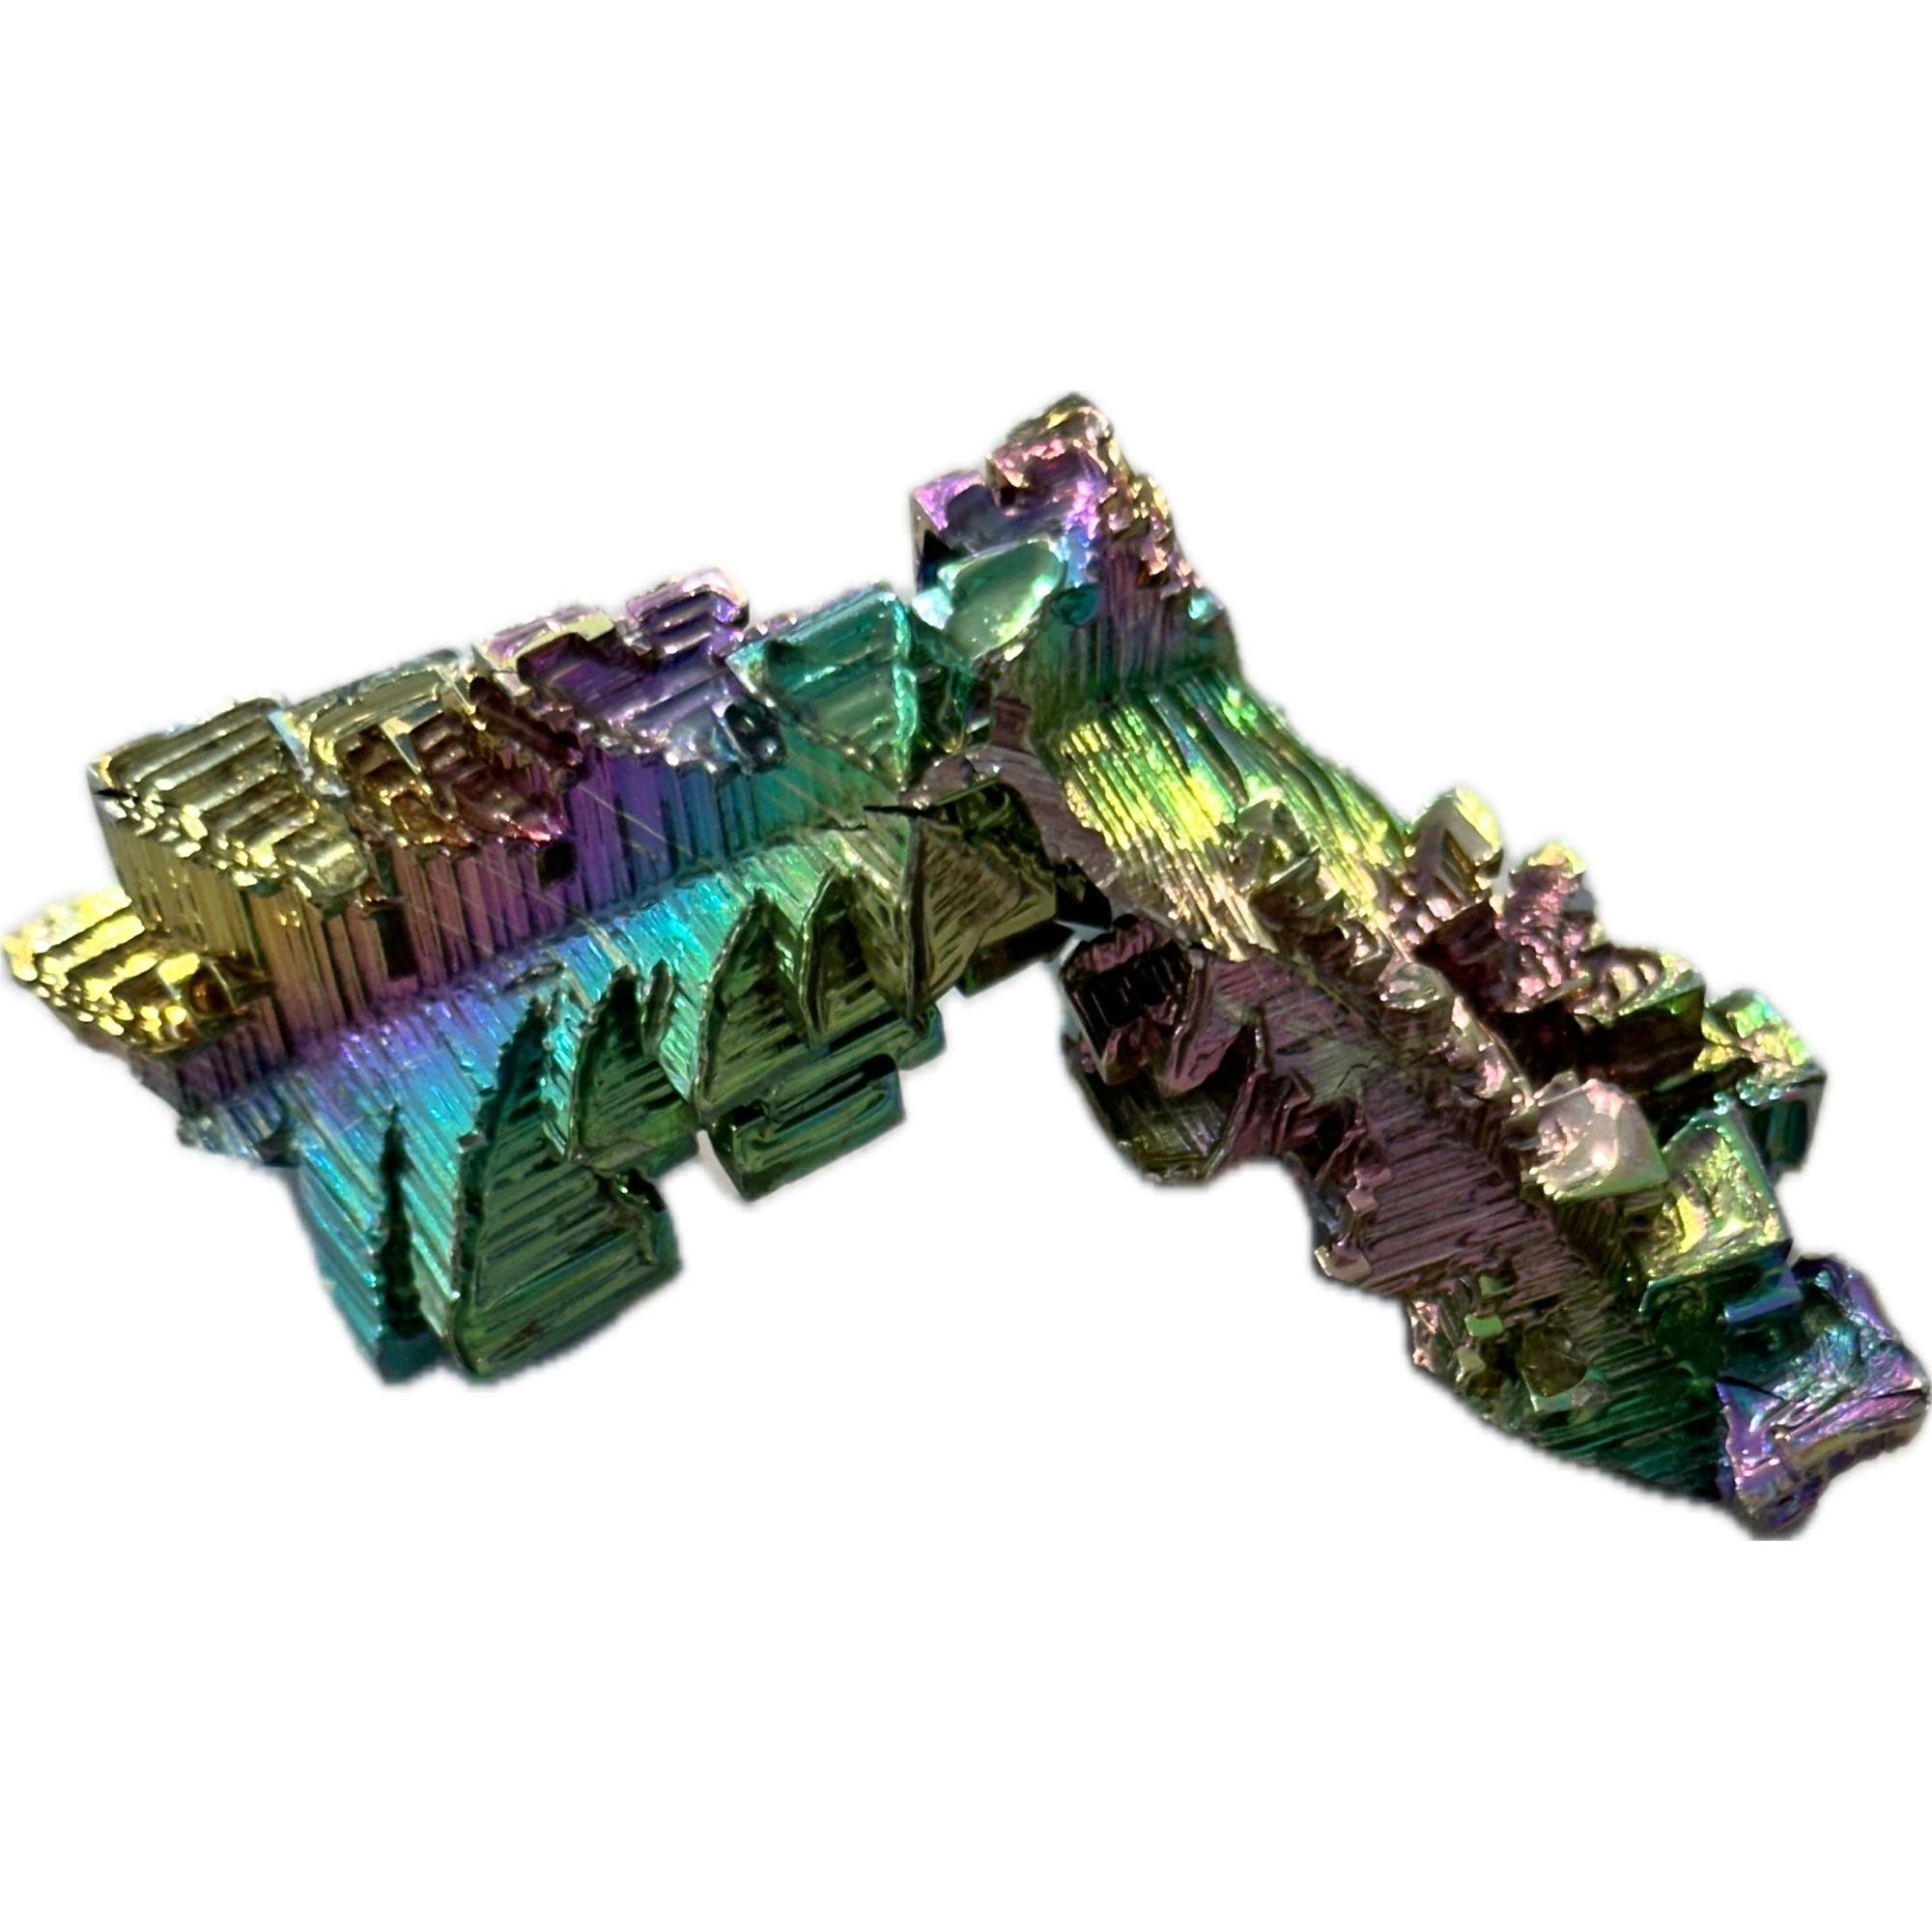 Bismuth, Bi on Periodic table, Unusual shape, great color Prehistoric Online